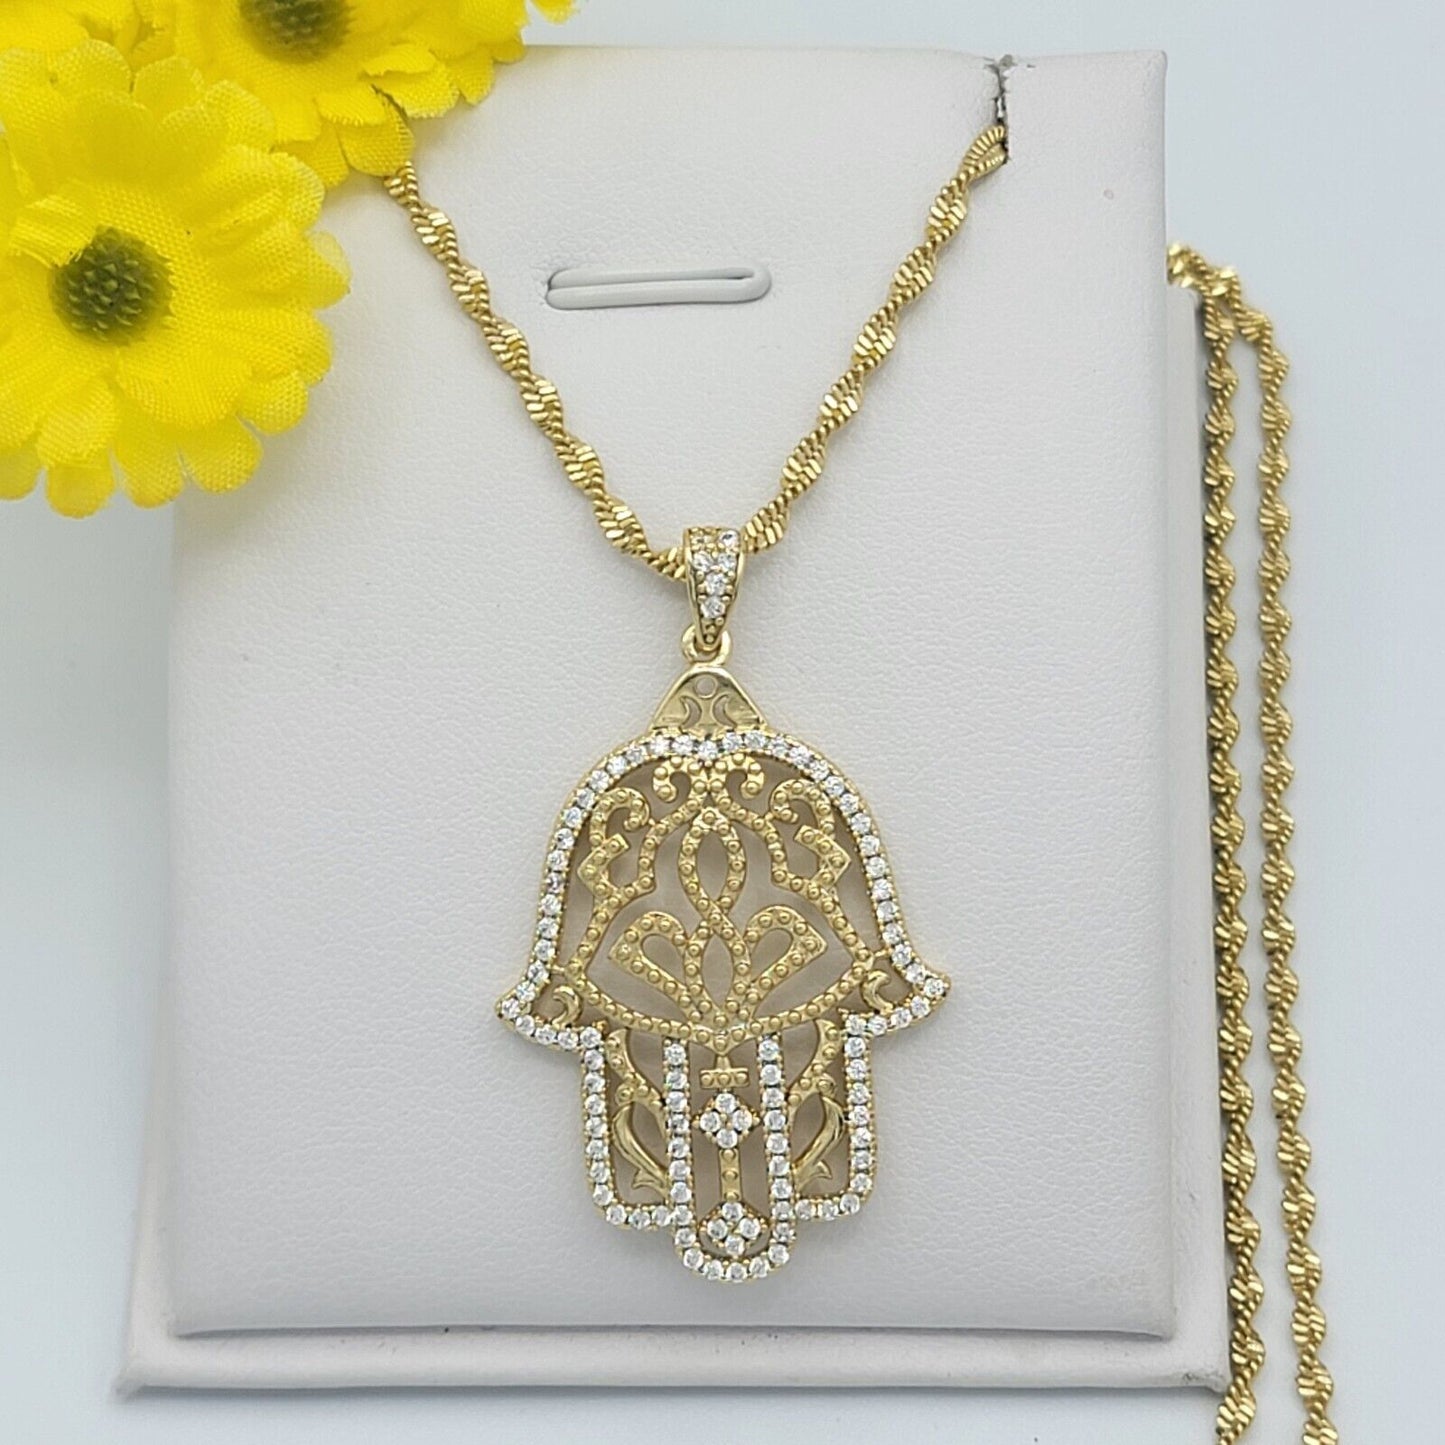 Necklaces - 14K Gold Plated. Hamsa Hand Pendant & Chain.